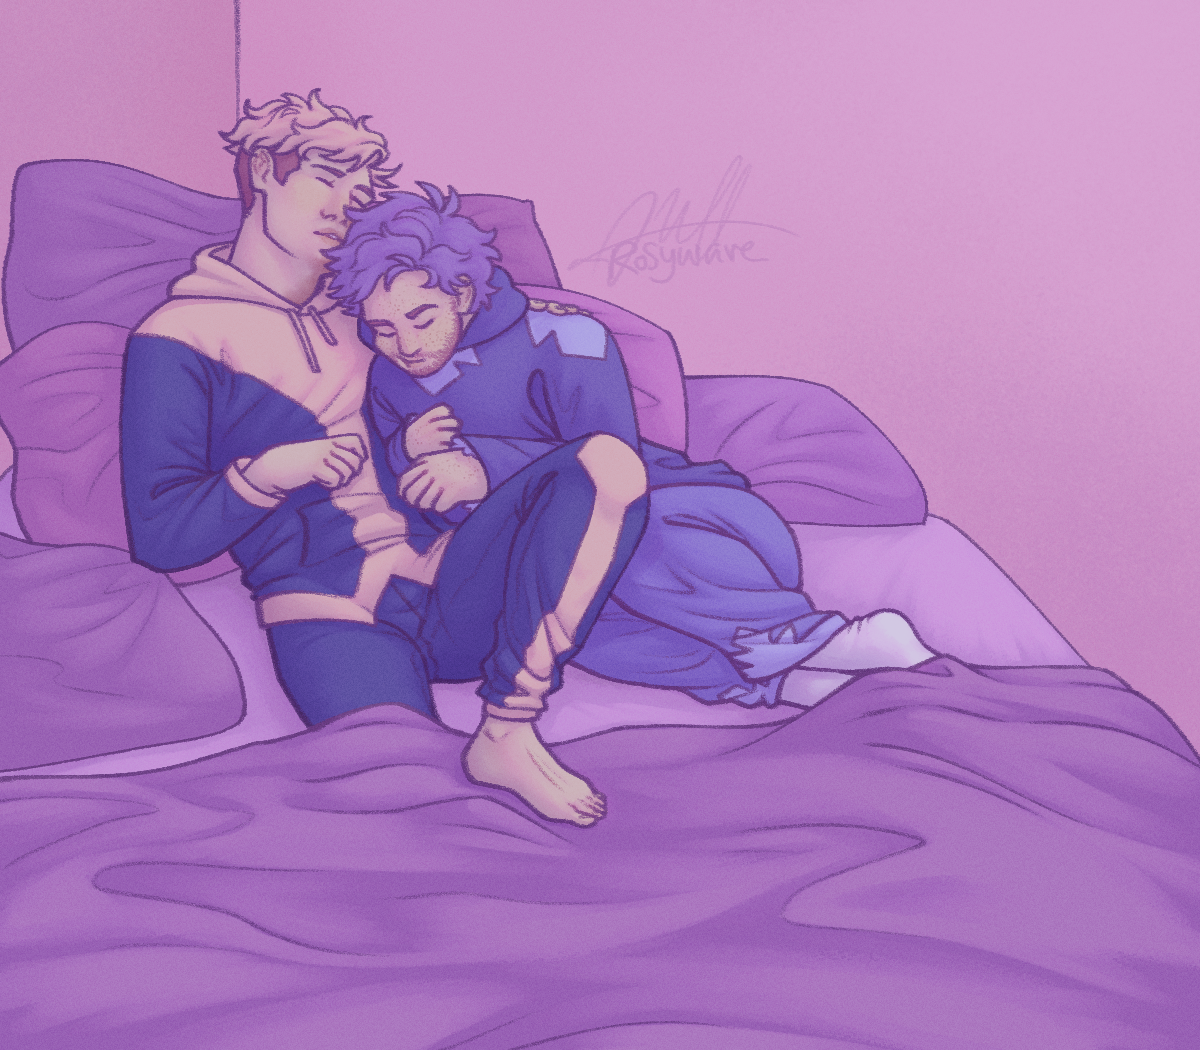 A drawing of two characters napping together in a big pile of pillows. They're leaning on each other's shoulders. The drawing is in a muted pastel color palette.